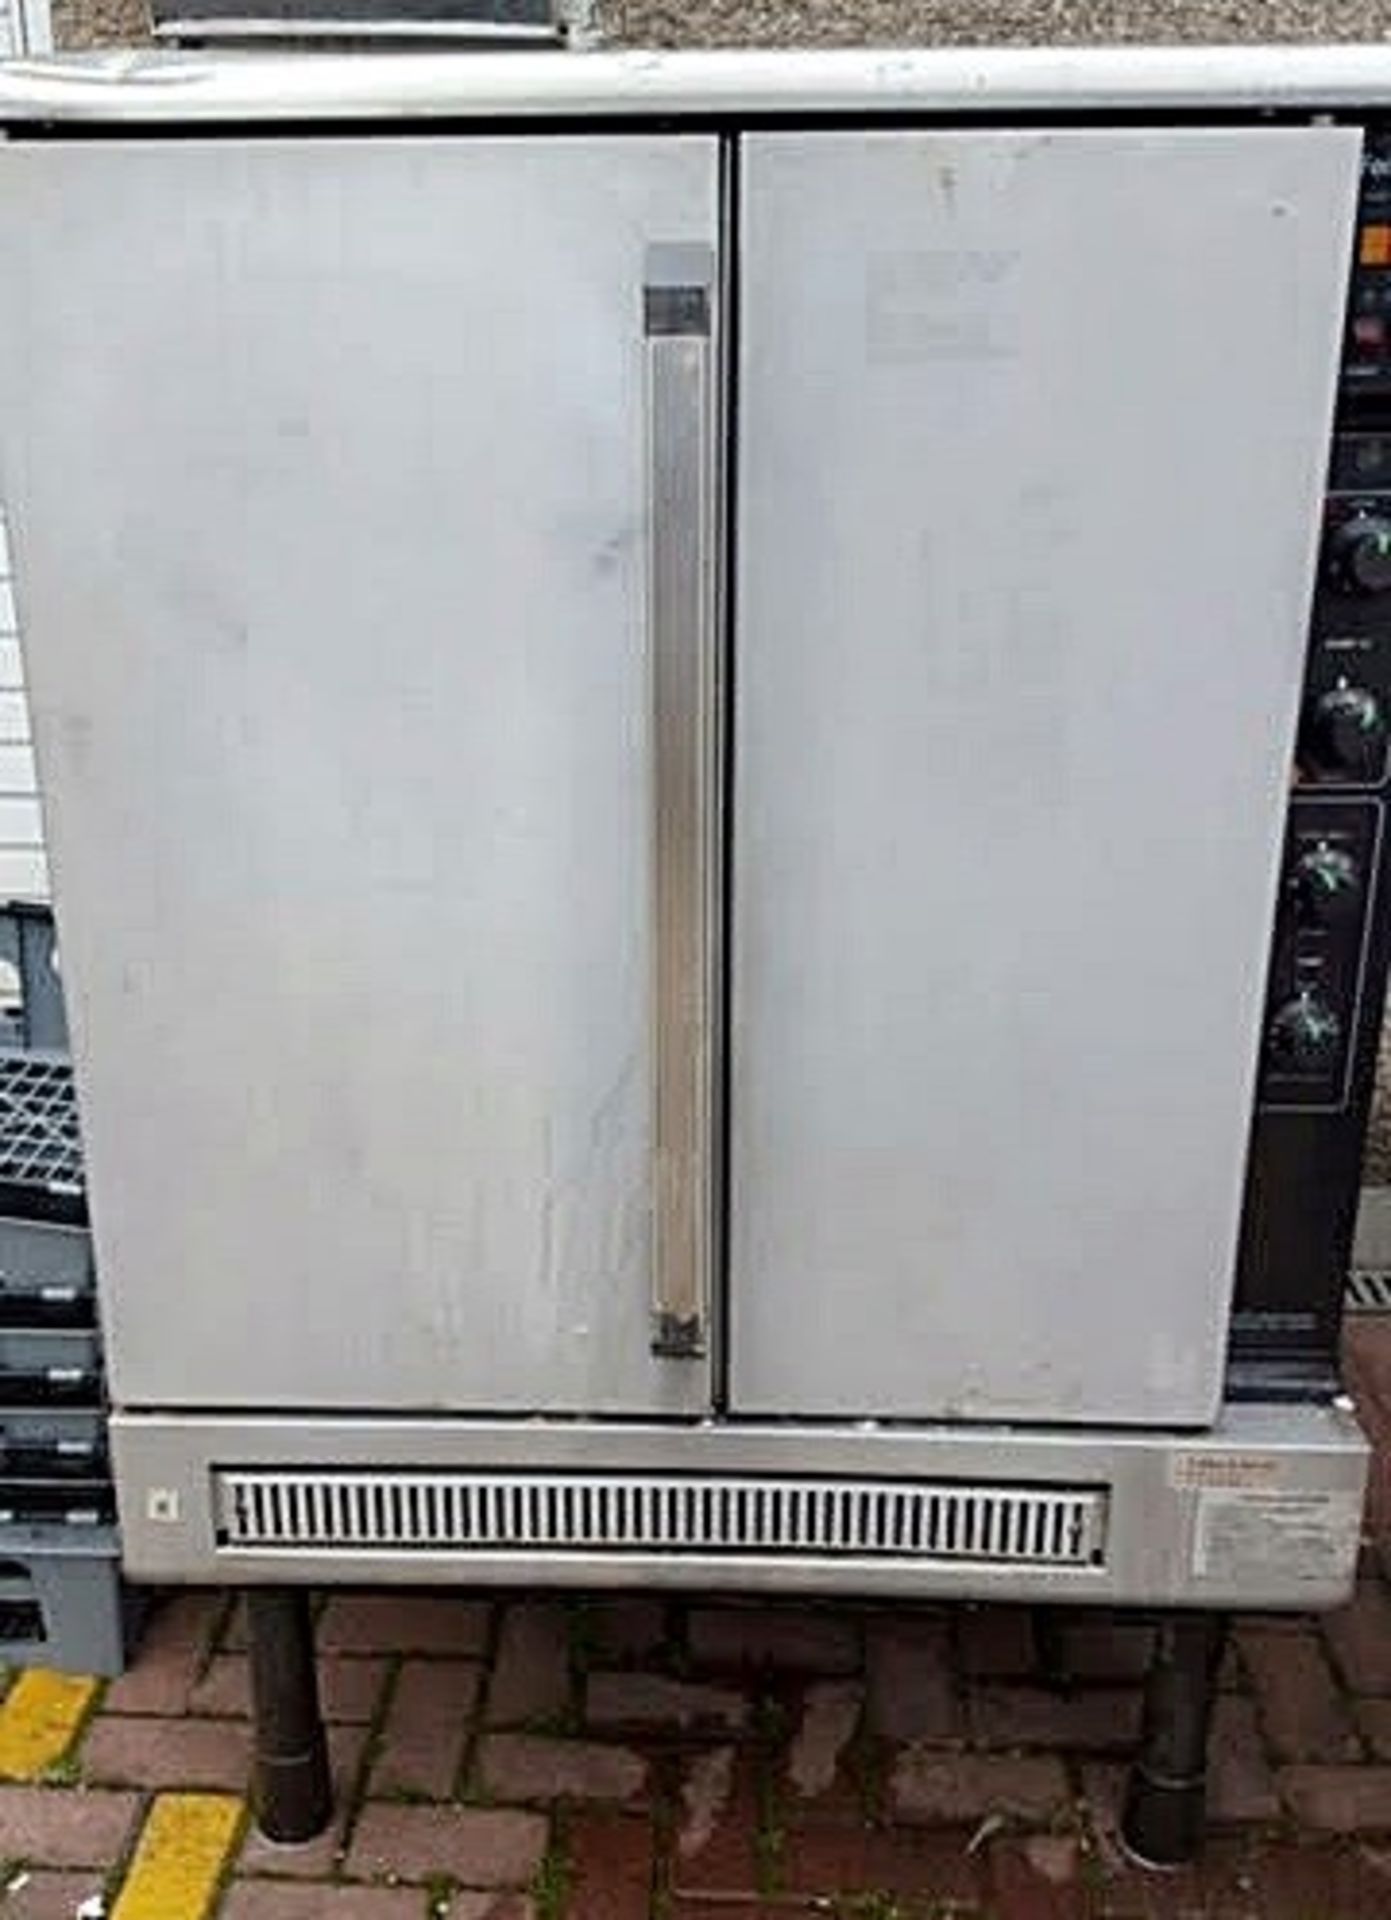 1 x Falcon 10-Shelf Gas Fan Oven - Pre-owned In Great Working Condition - A Great Piece Of Kit -